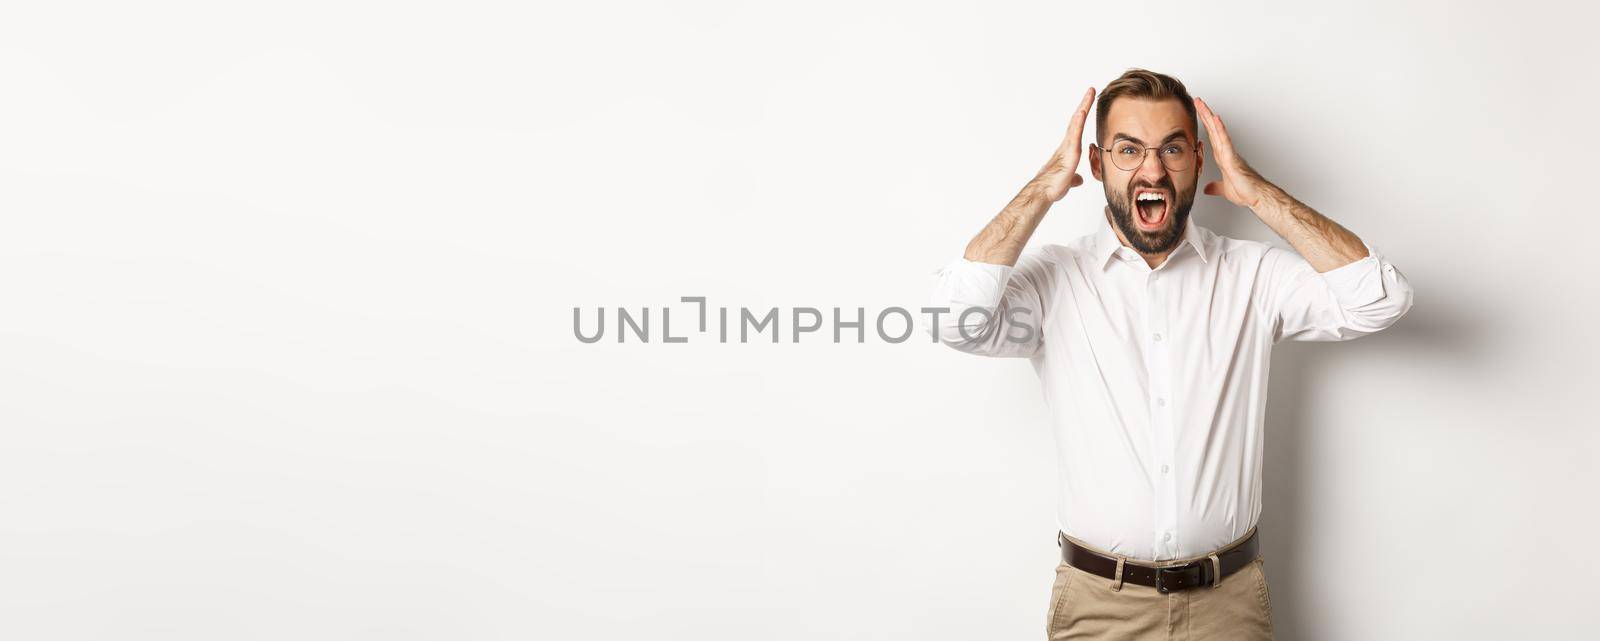 Frustrated man panicking, shouting and looking anxious, standing over white background.